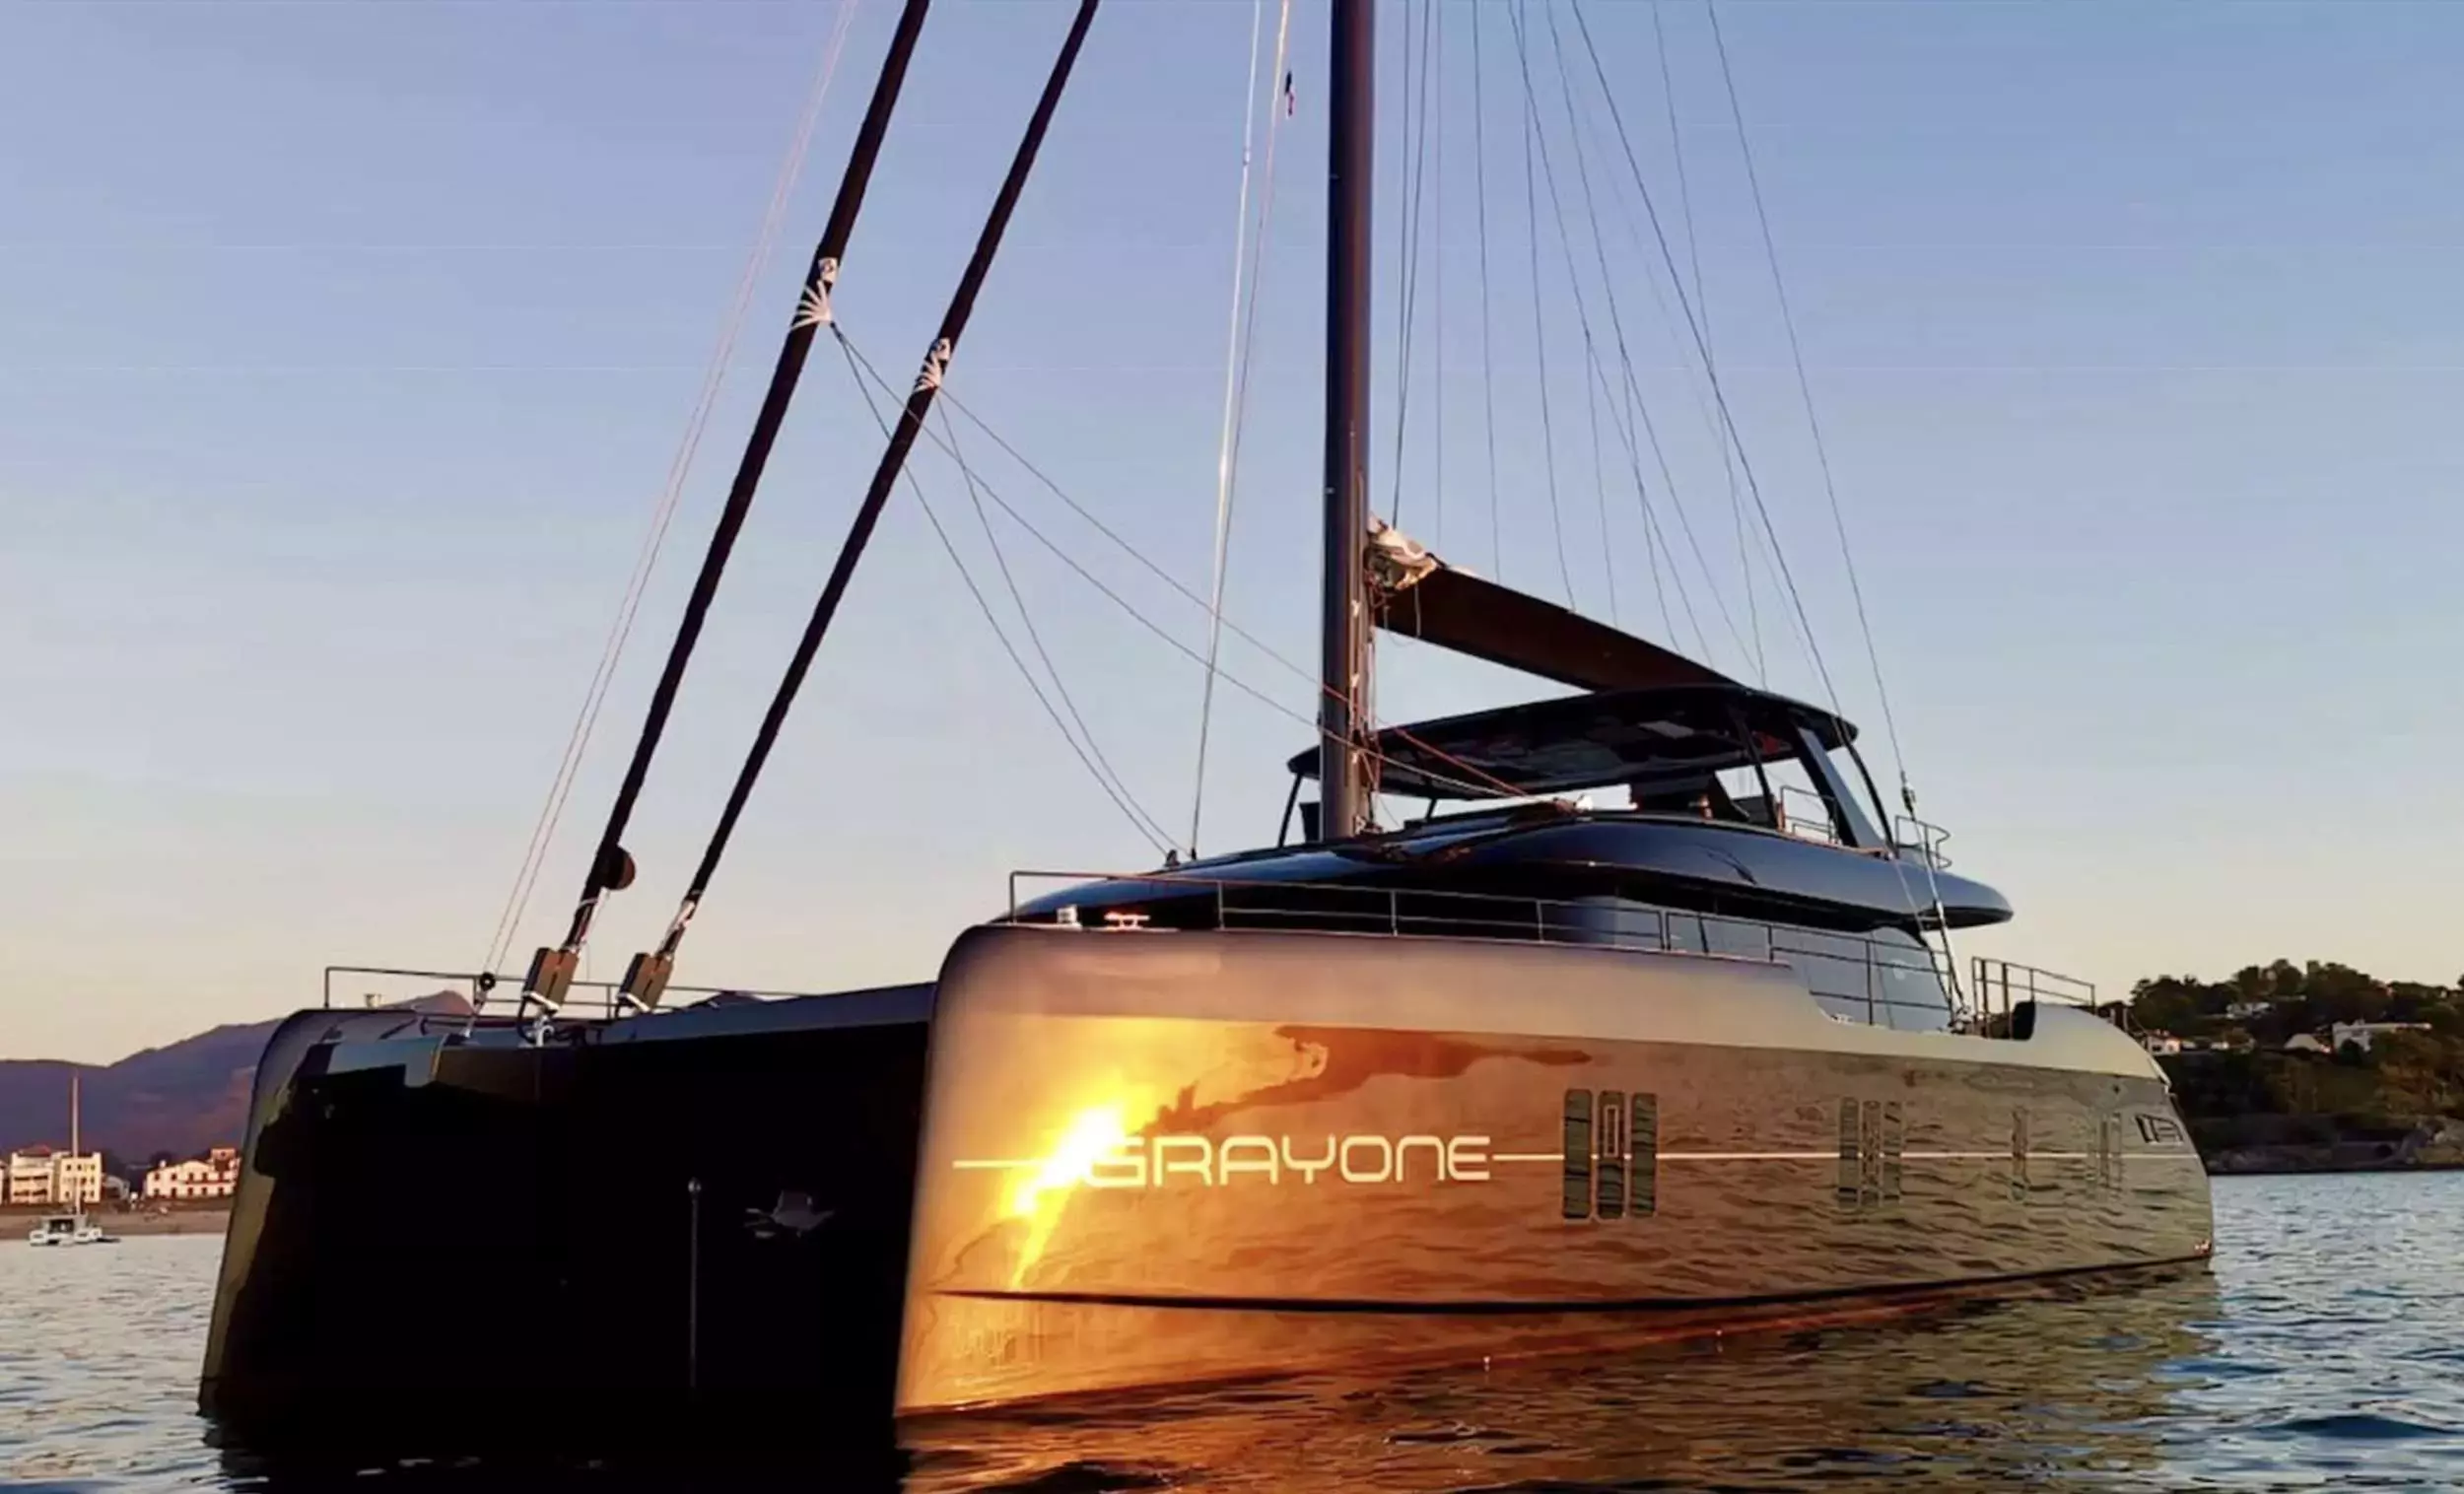 Grayone by Sunreef Yachts - Top rates for a Rental of a private Sailing Catamaran in Greece